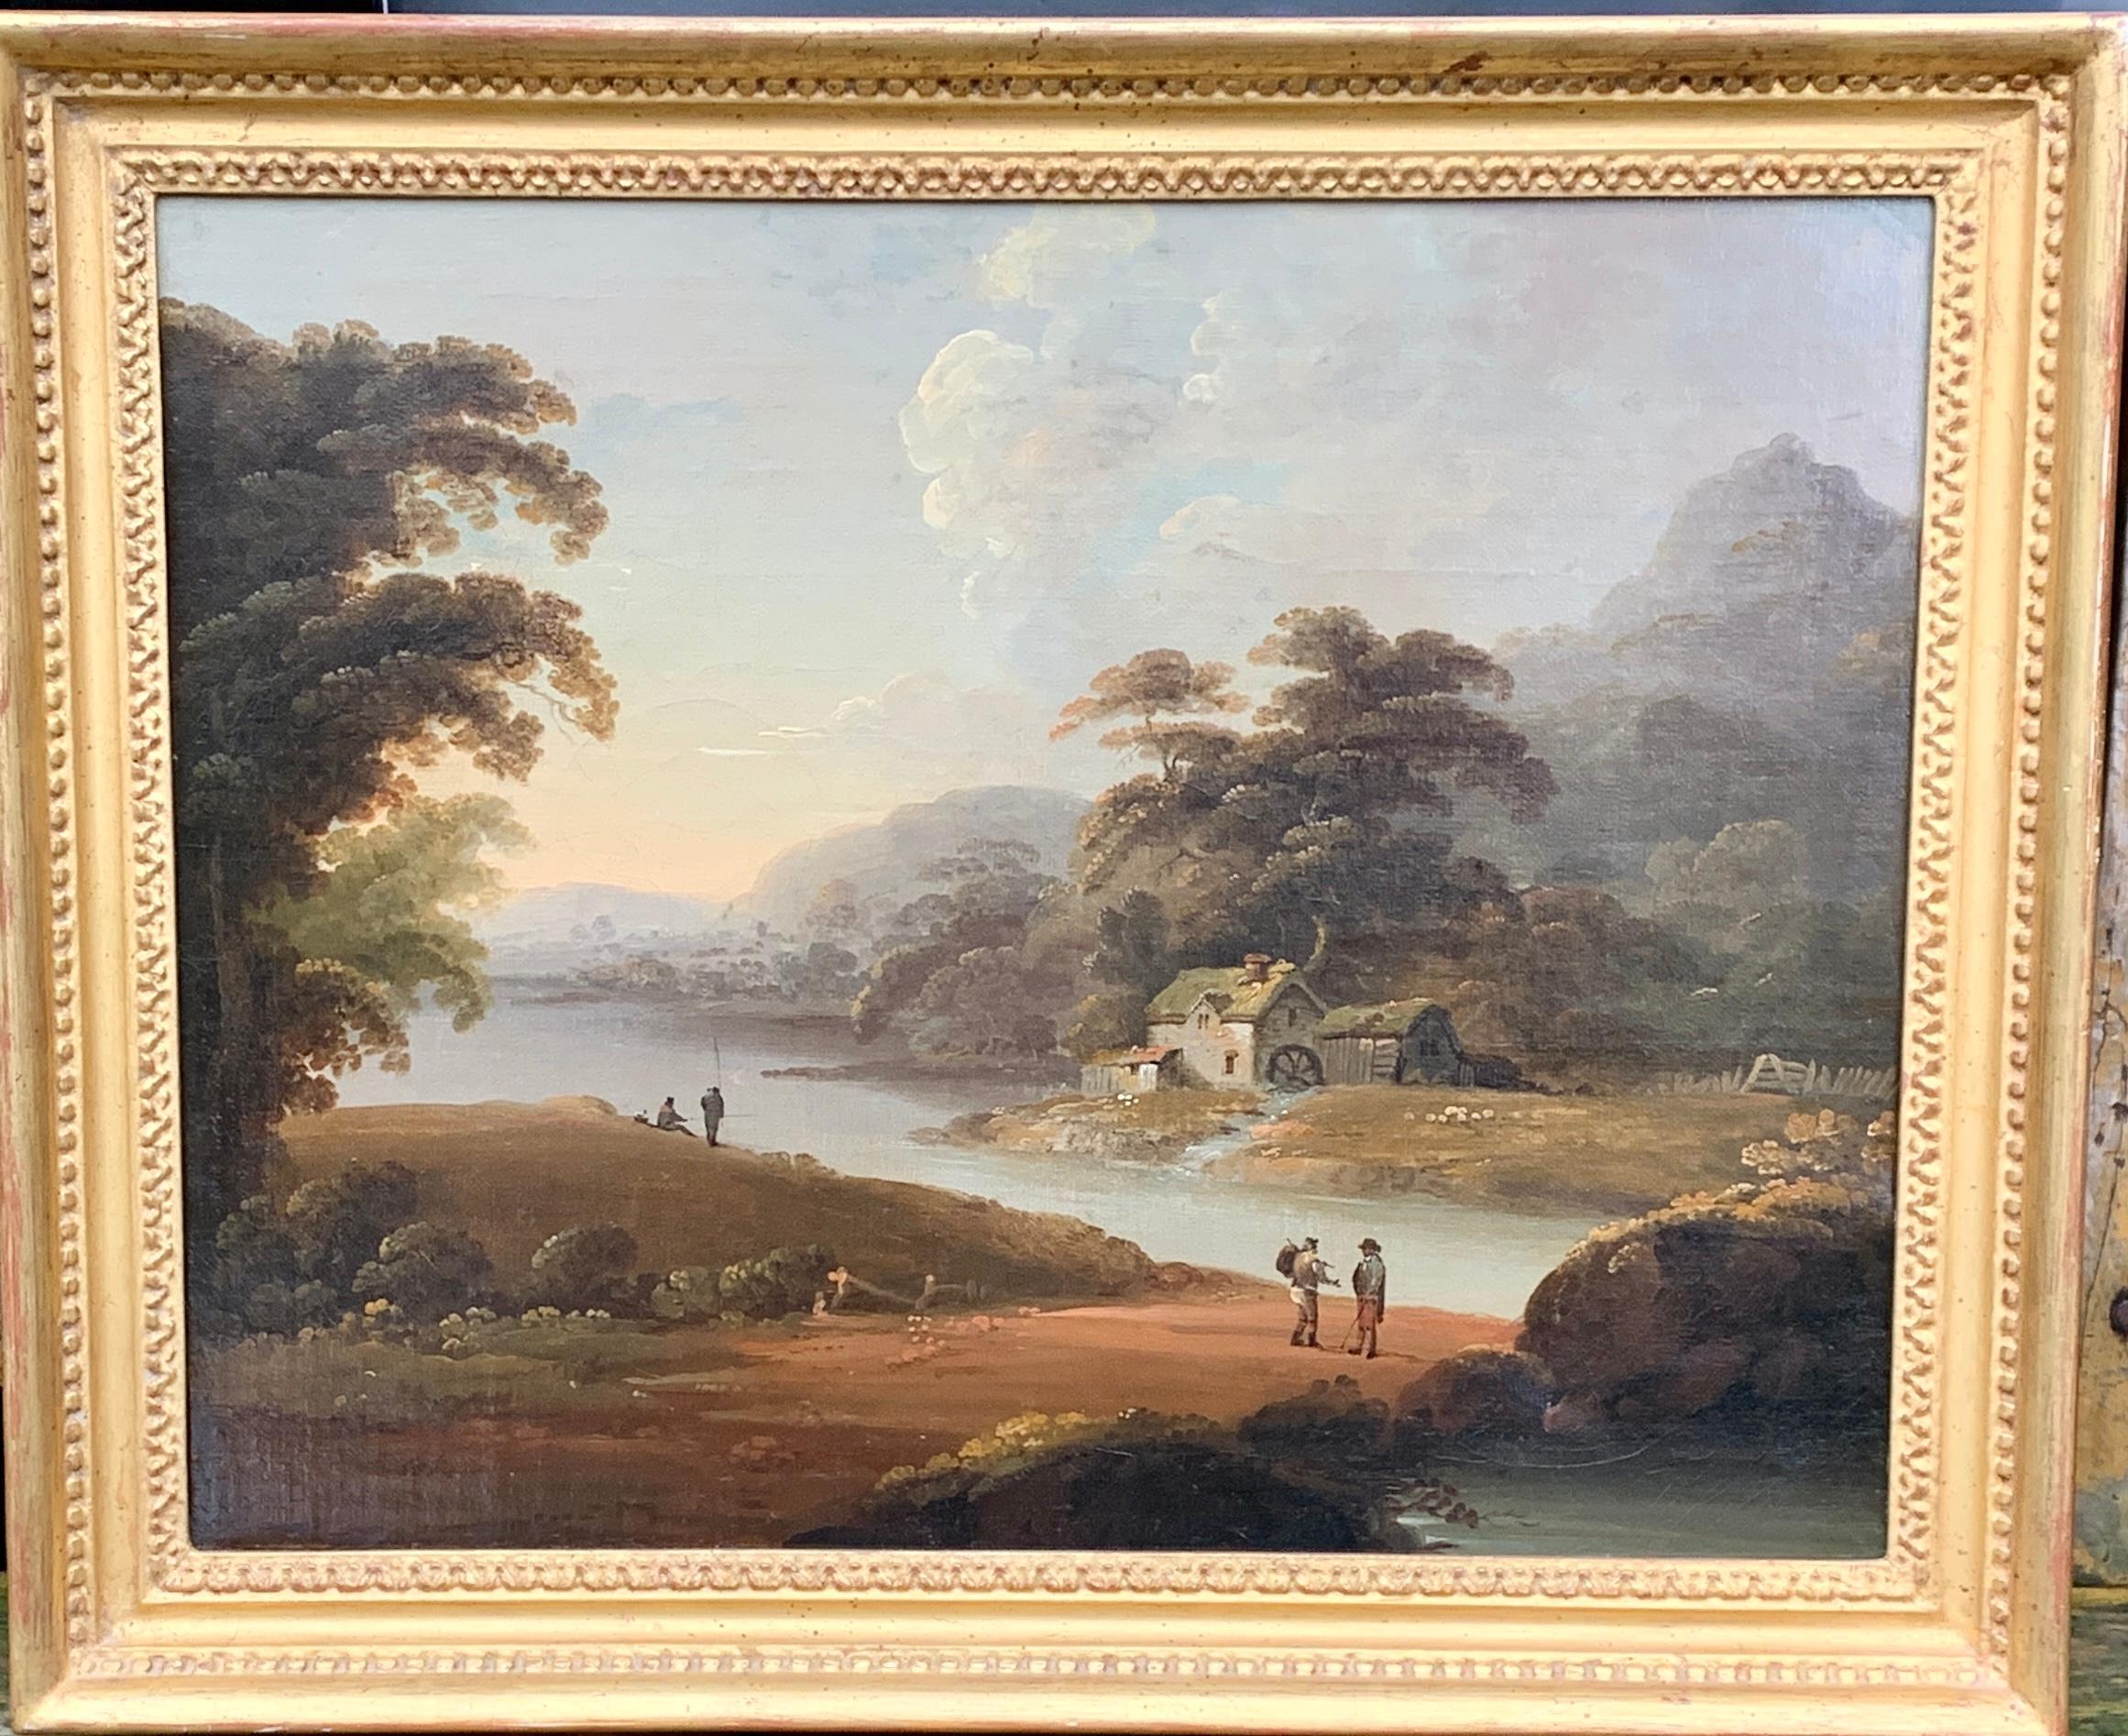  18th century English oil landscape with river and figures fishing by a cottage - Painting by John Rathbone